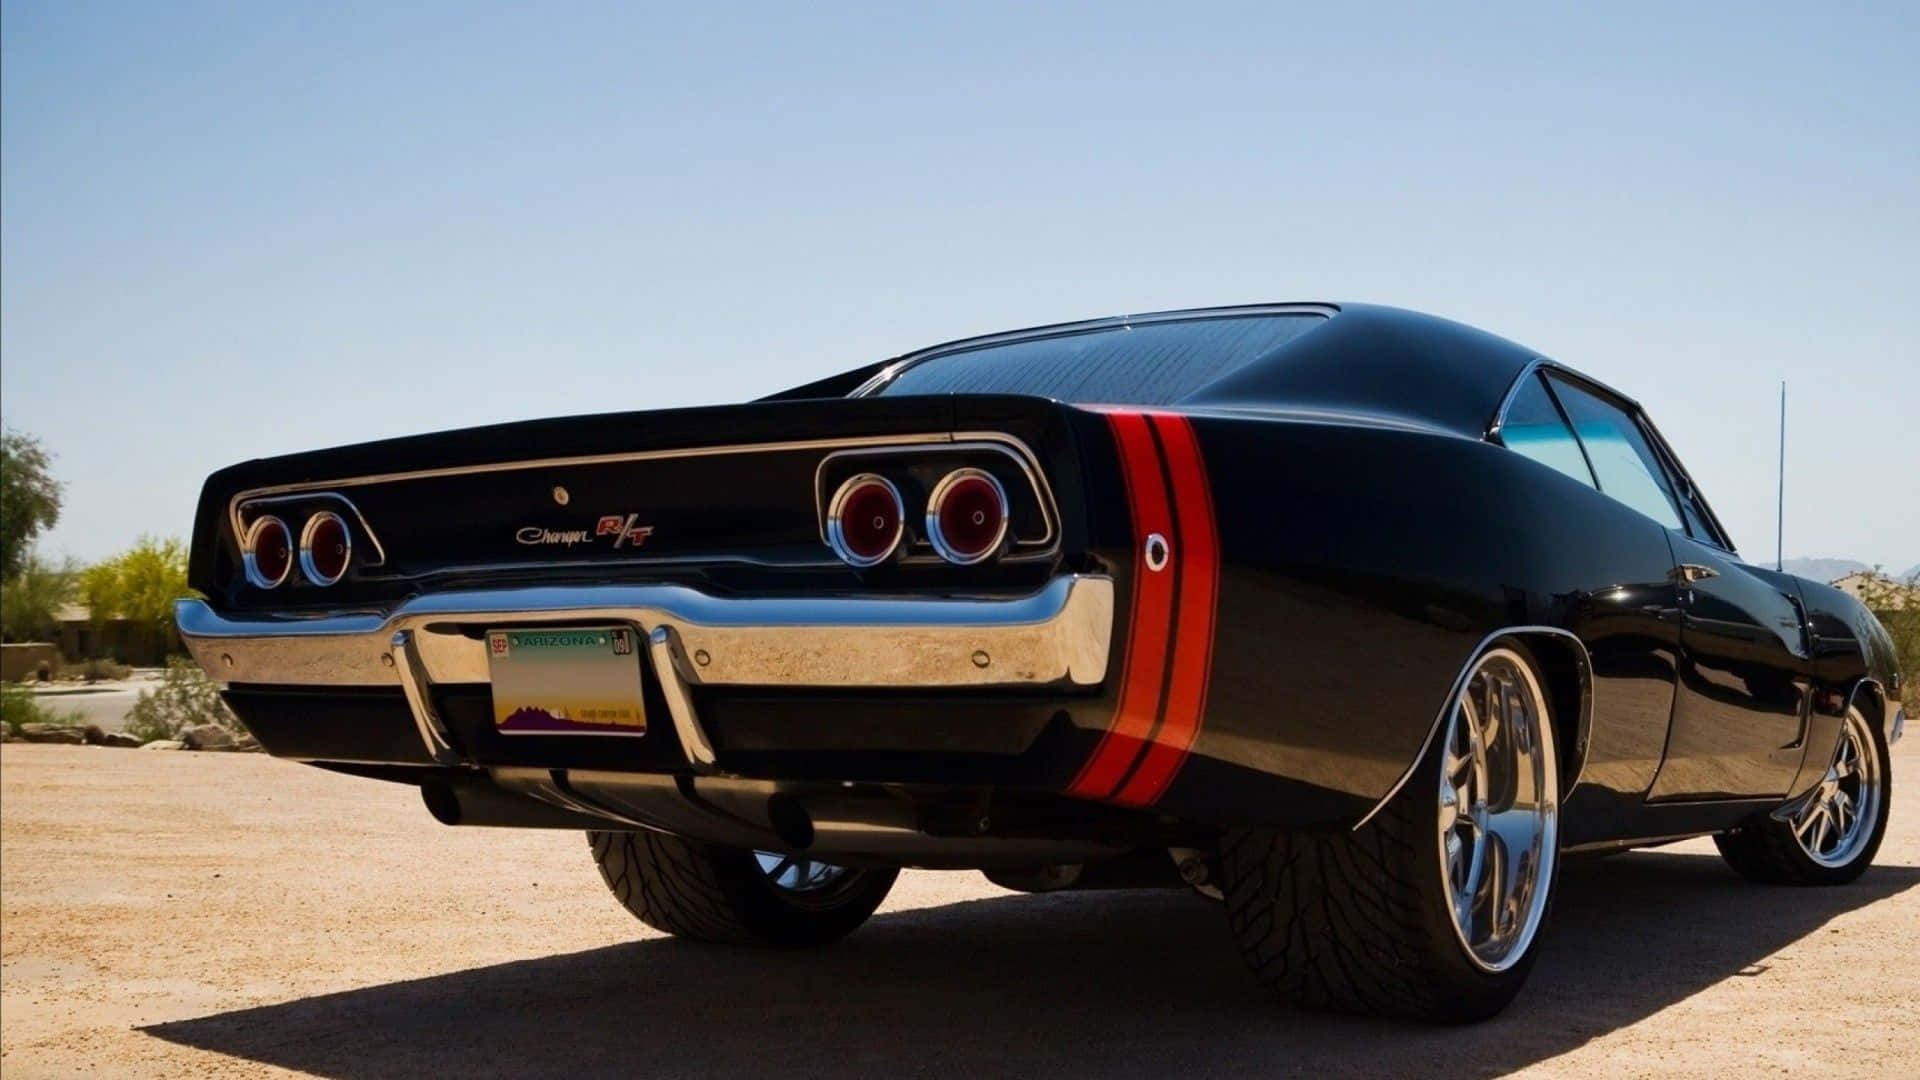 A Black Muscle Car Parked In The Desert Wallpaper